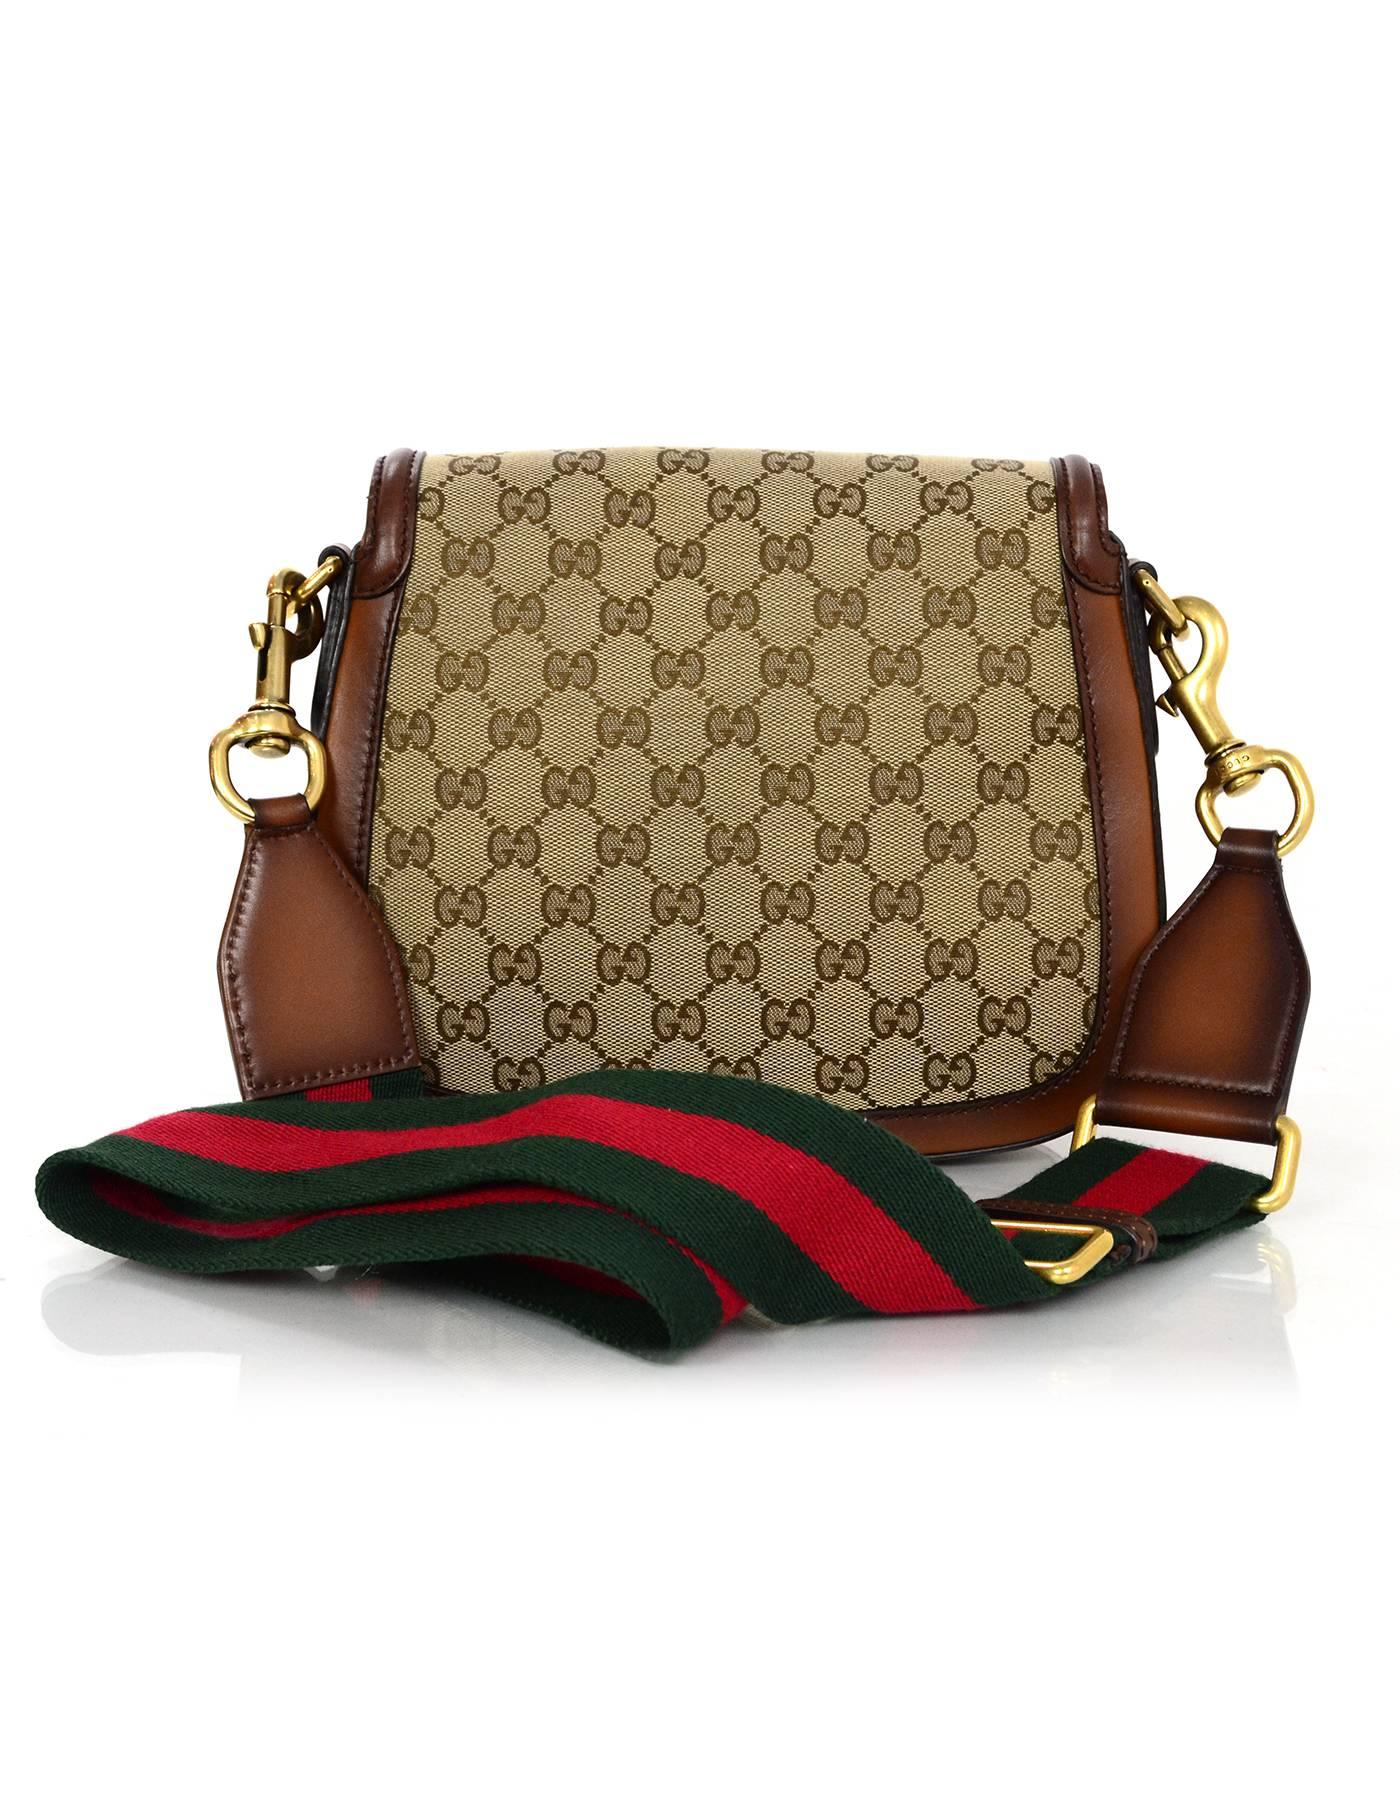 gucci crossbody with red and green strap